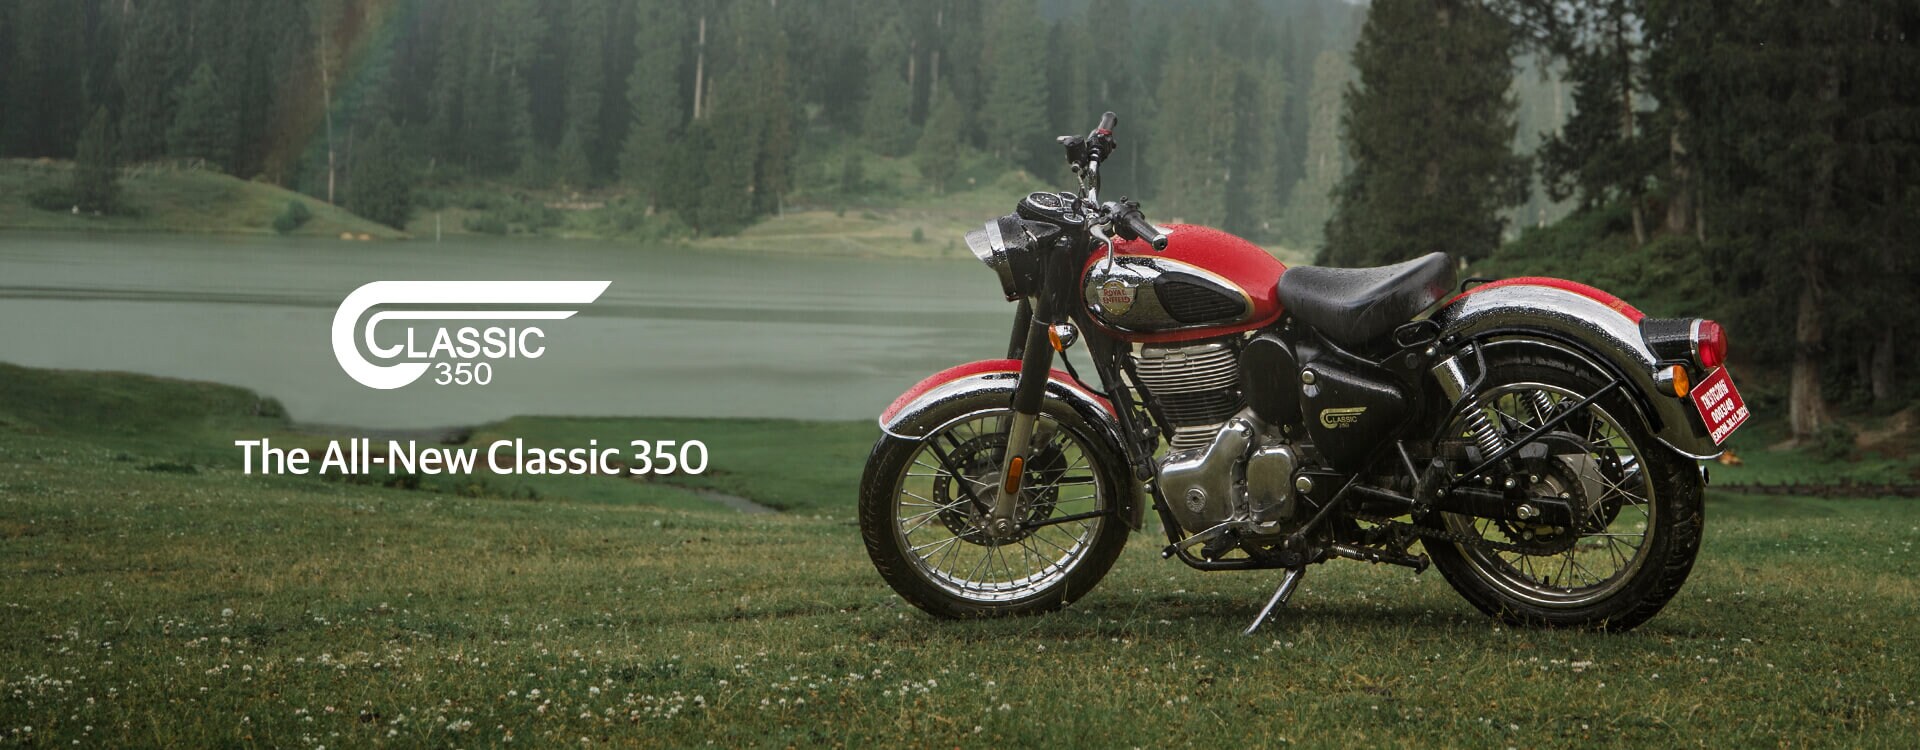 Royal Enfield Hunter 350 unveiled: Detailed image gallery of design,  features - IN PICS, News